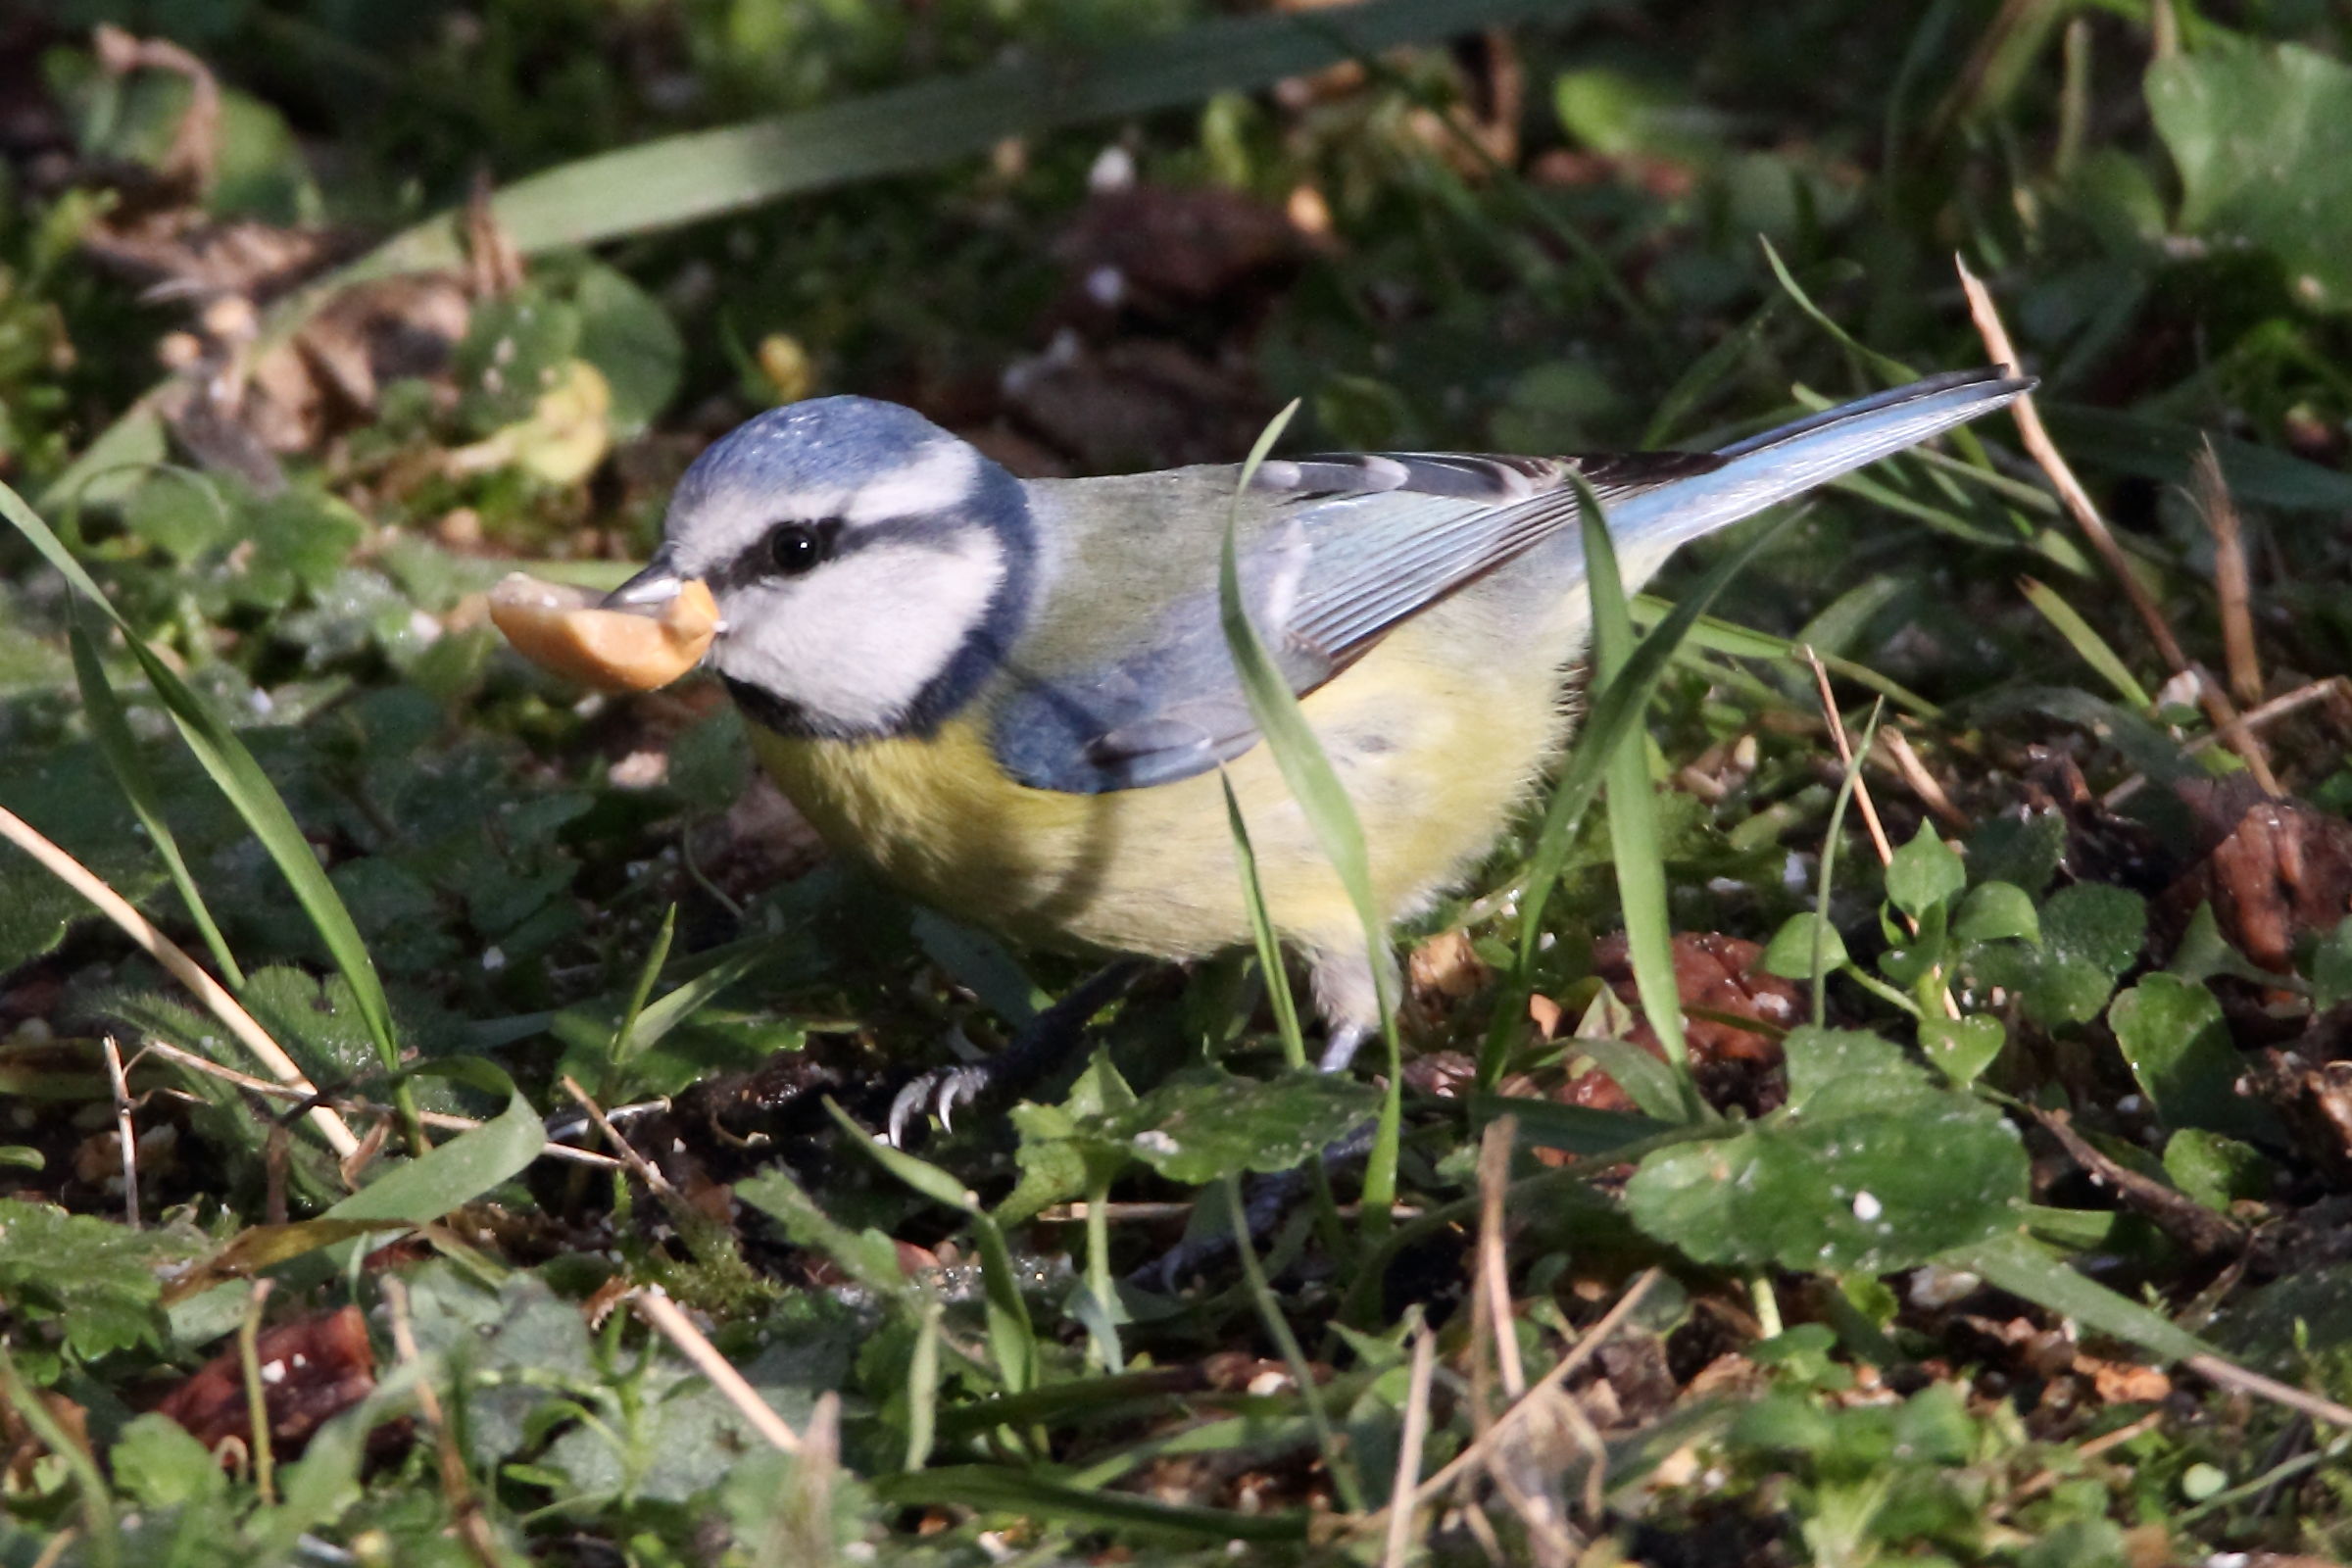 The blue tit with peanut...